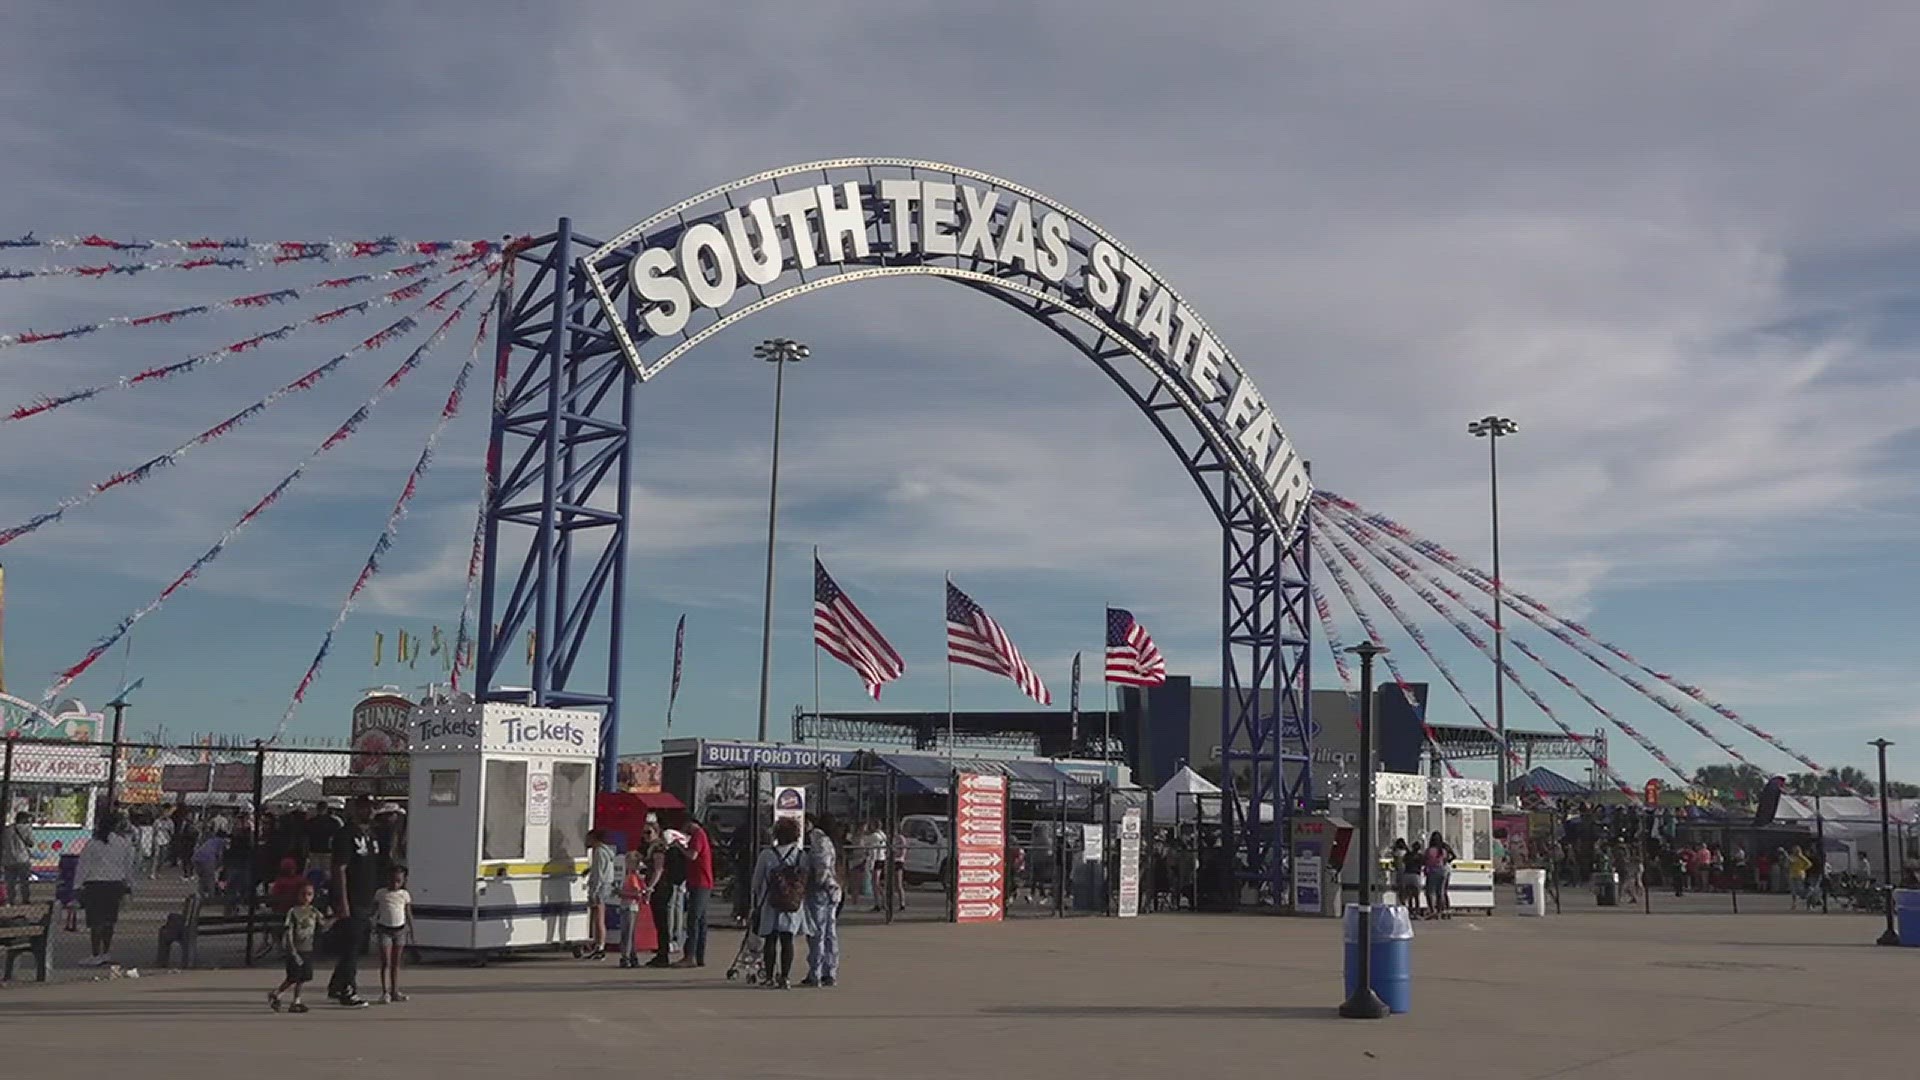 For the past 81 years, the YMBL South Texas State Fair has put smiles on the faces of the young and young at heart.